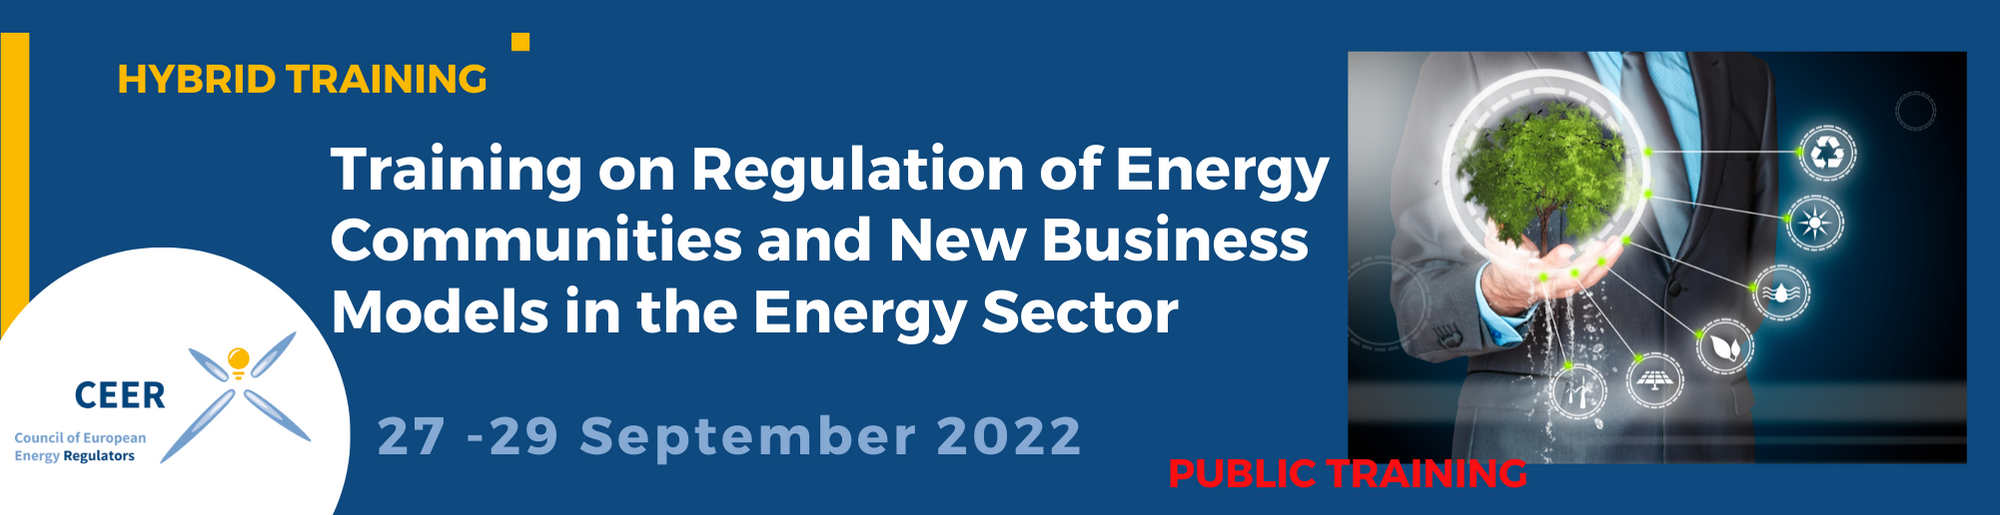 Regulation of Energy Communities and New Business Models in the Energy Sector